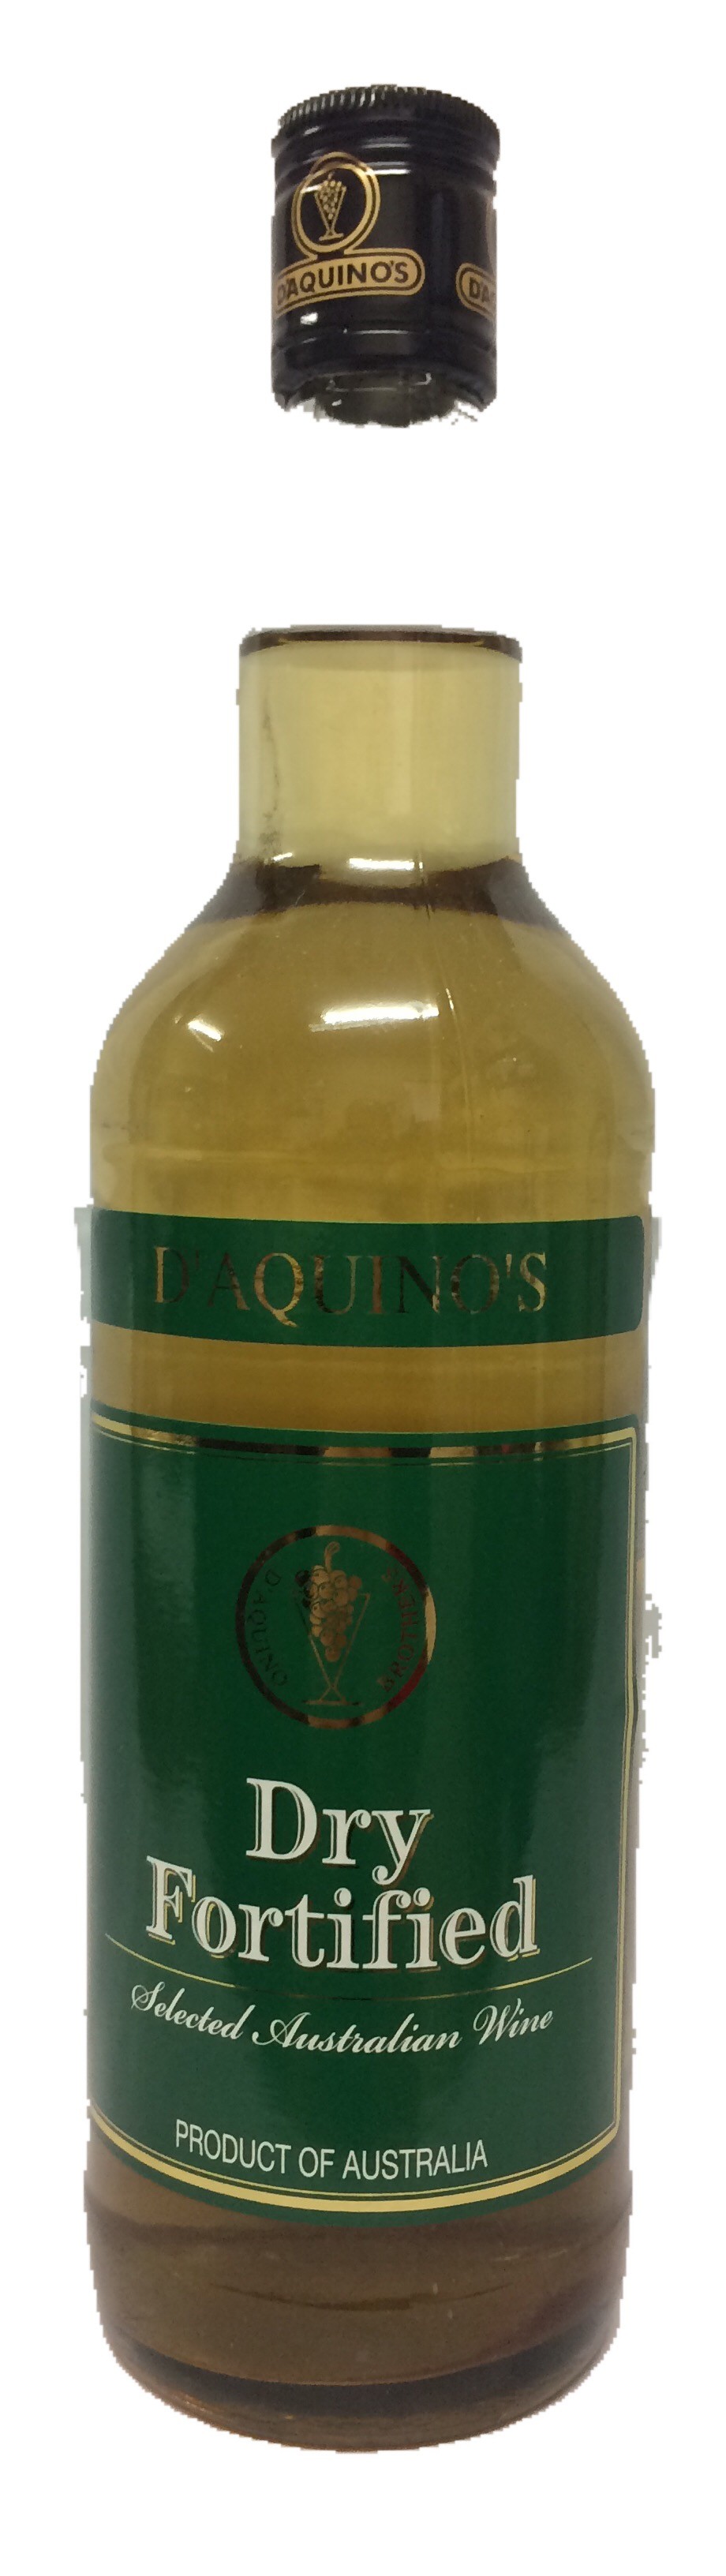 Dry Sherry Fortified